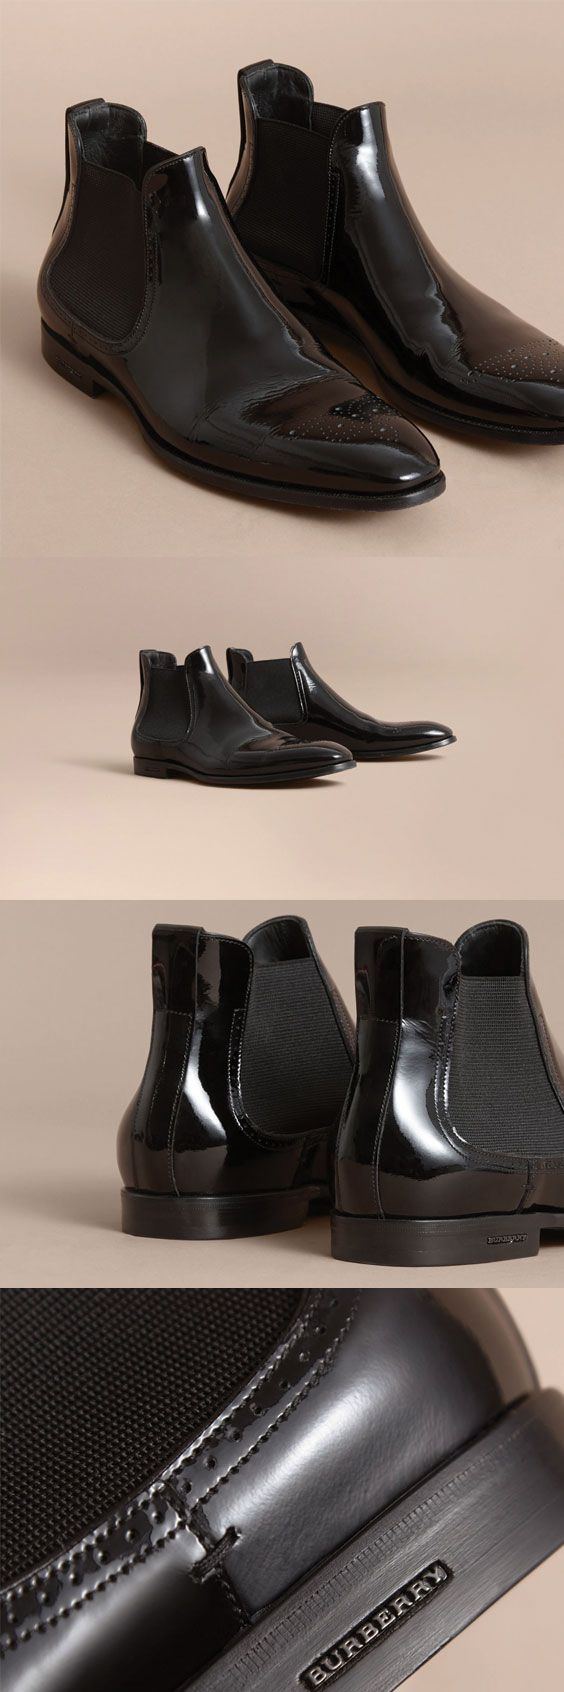 Burberry Polished Leather Chelsea Boots $695 men shoes men boots